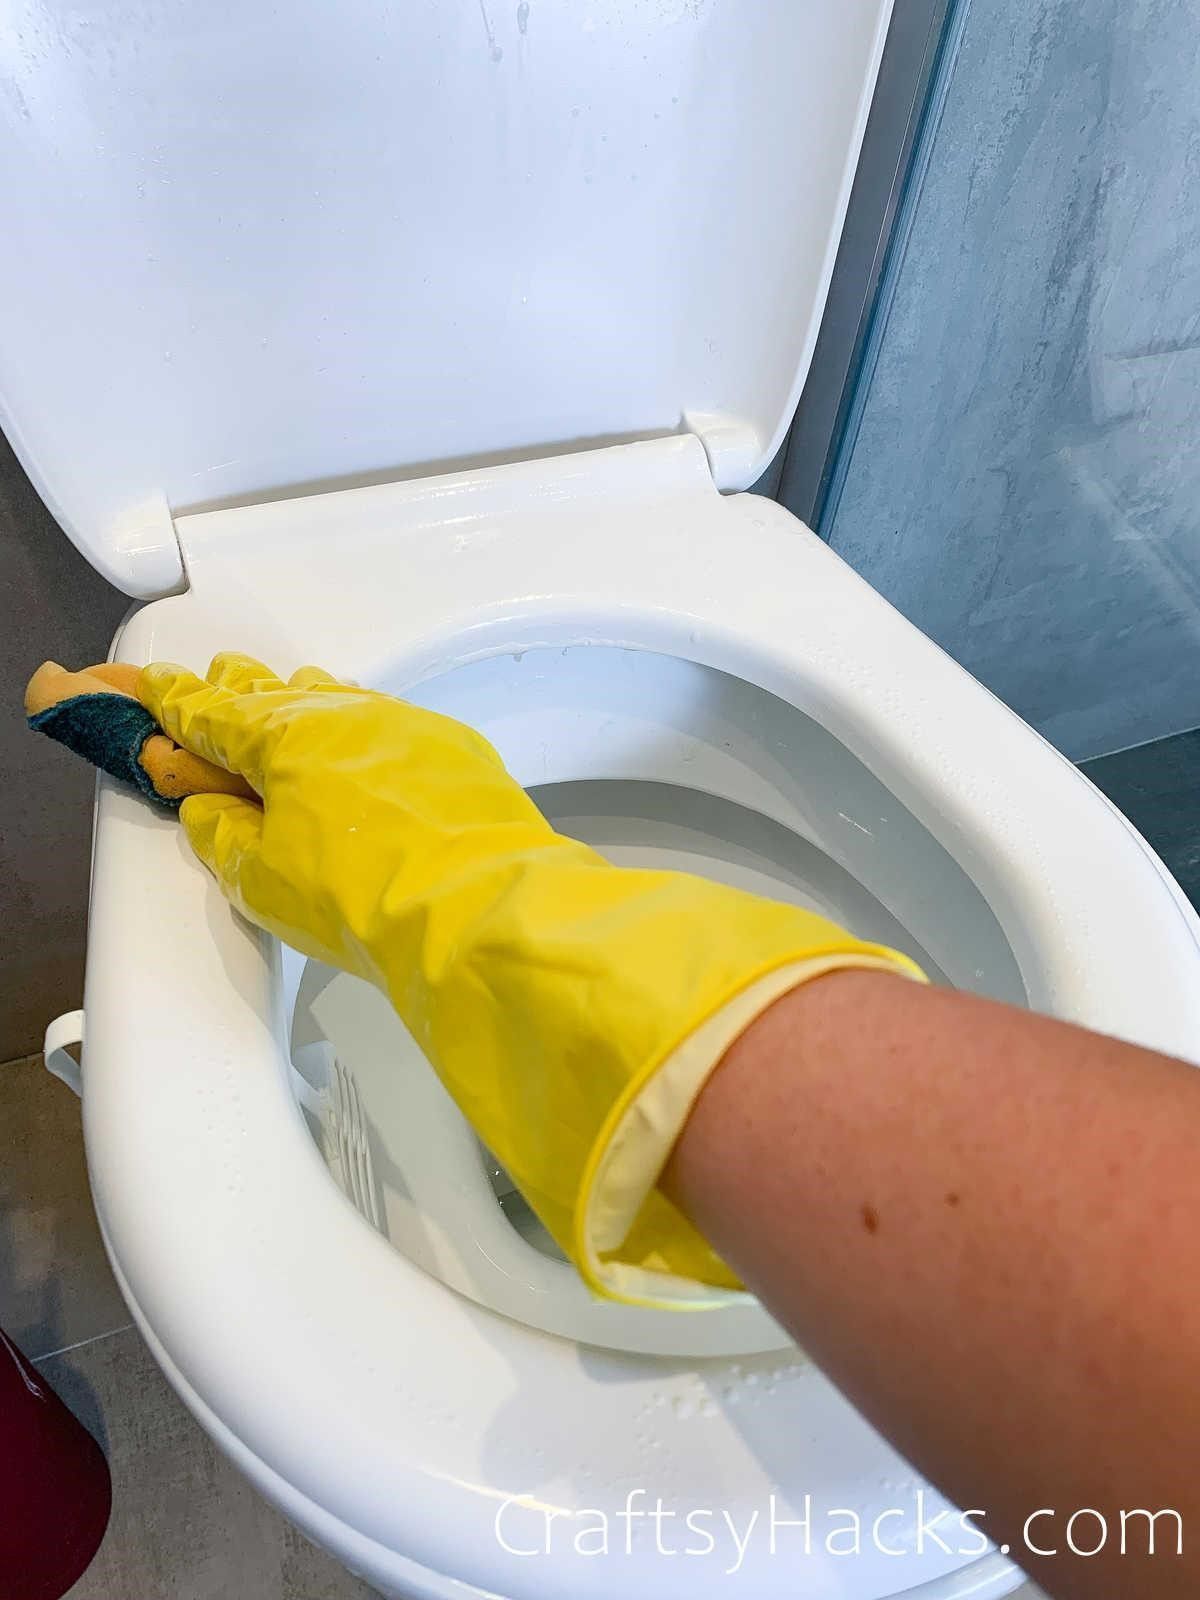 give toilet deep clean